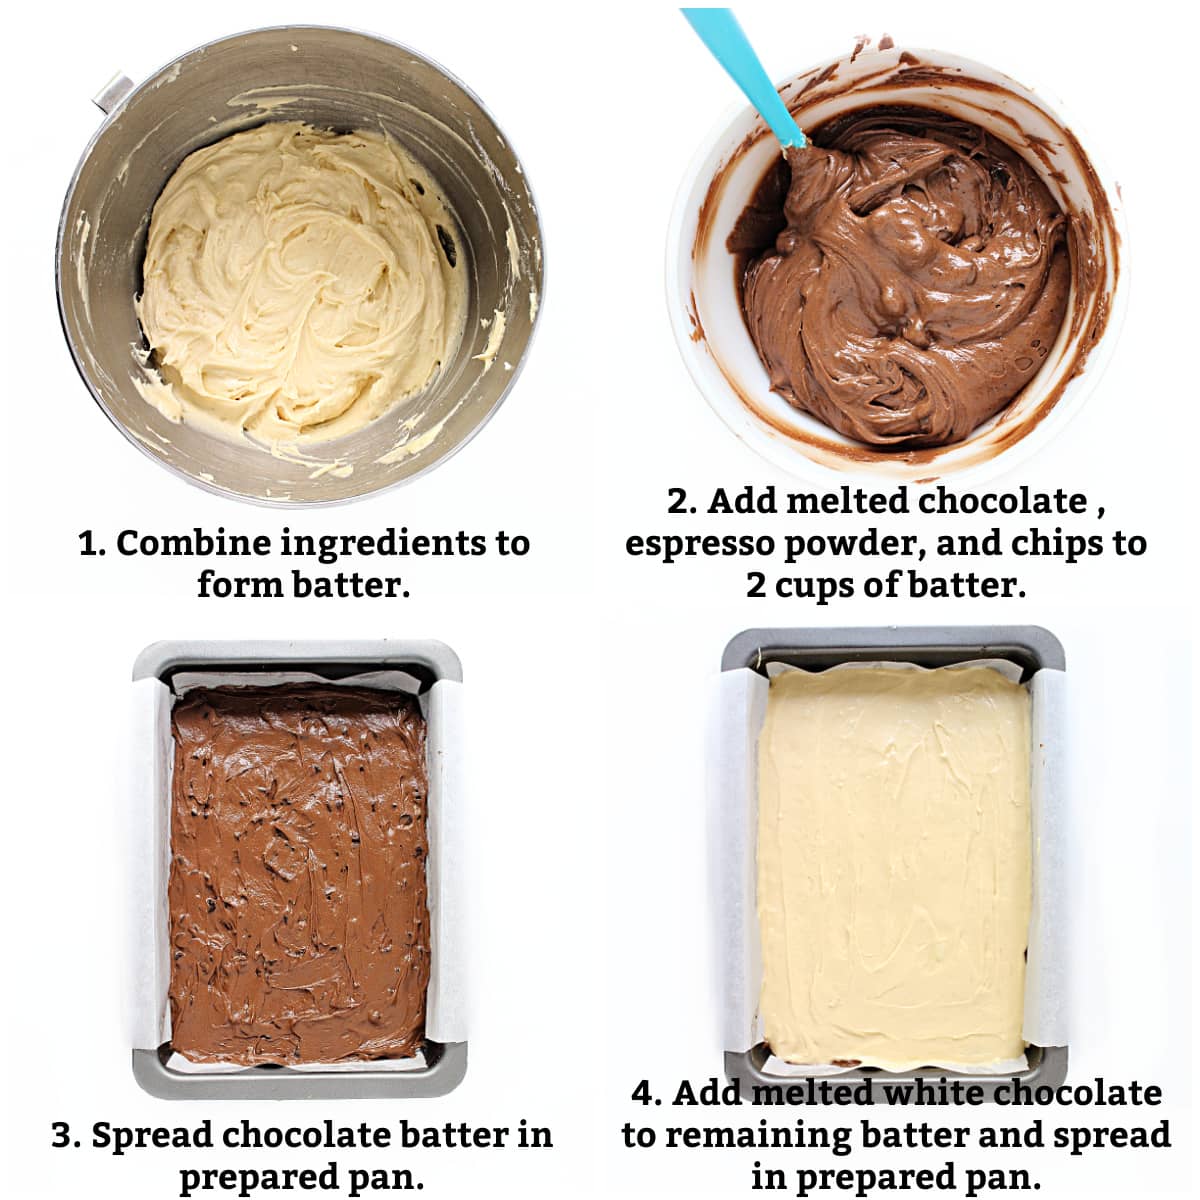 Instructions: combine ingredients, mix chocolate batter, spread chocolate layer in pan, top with vanilla layer.